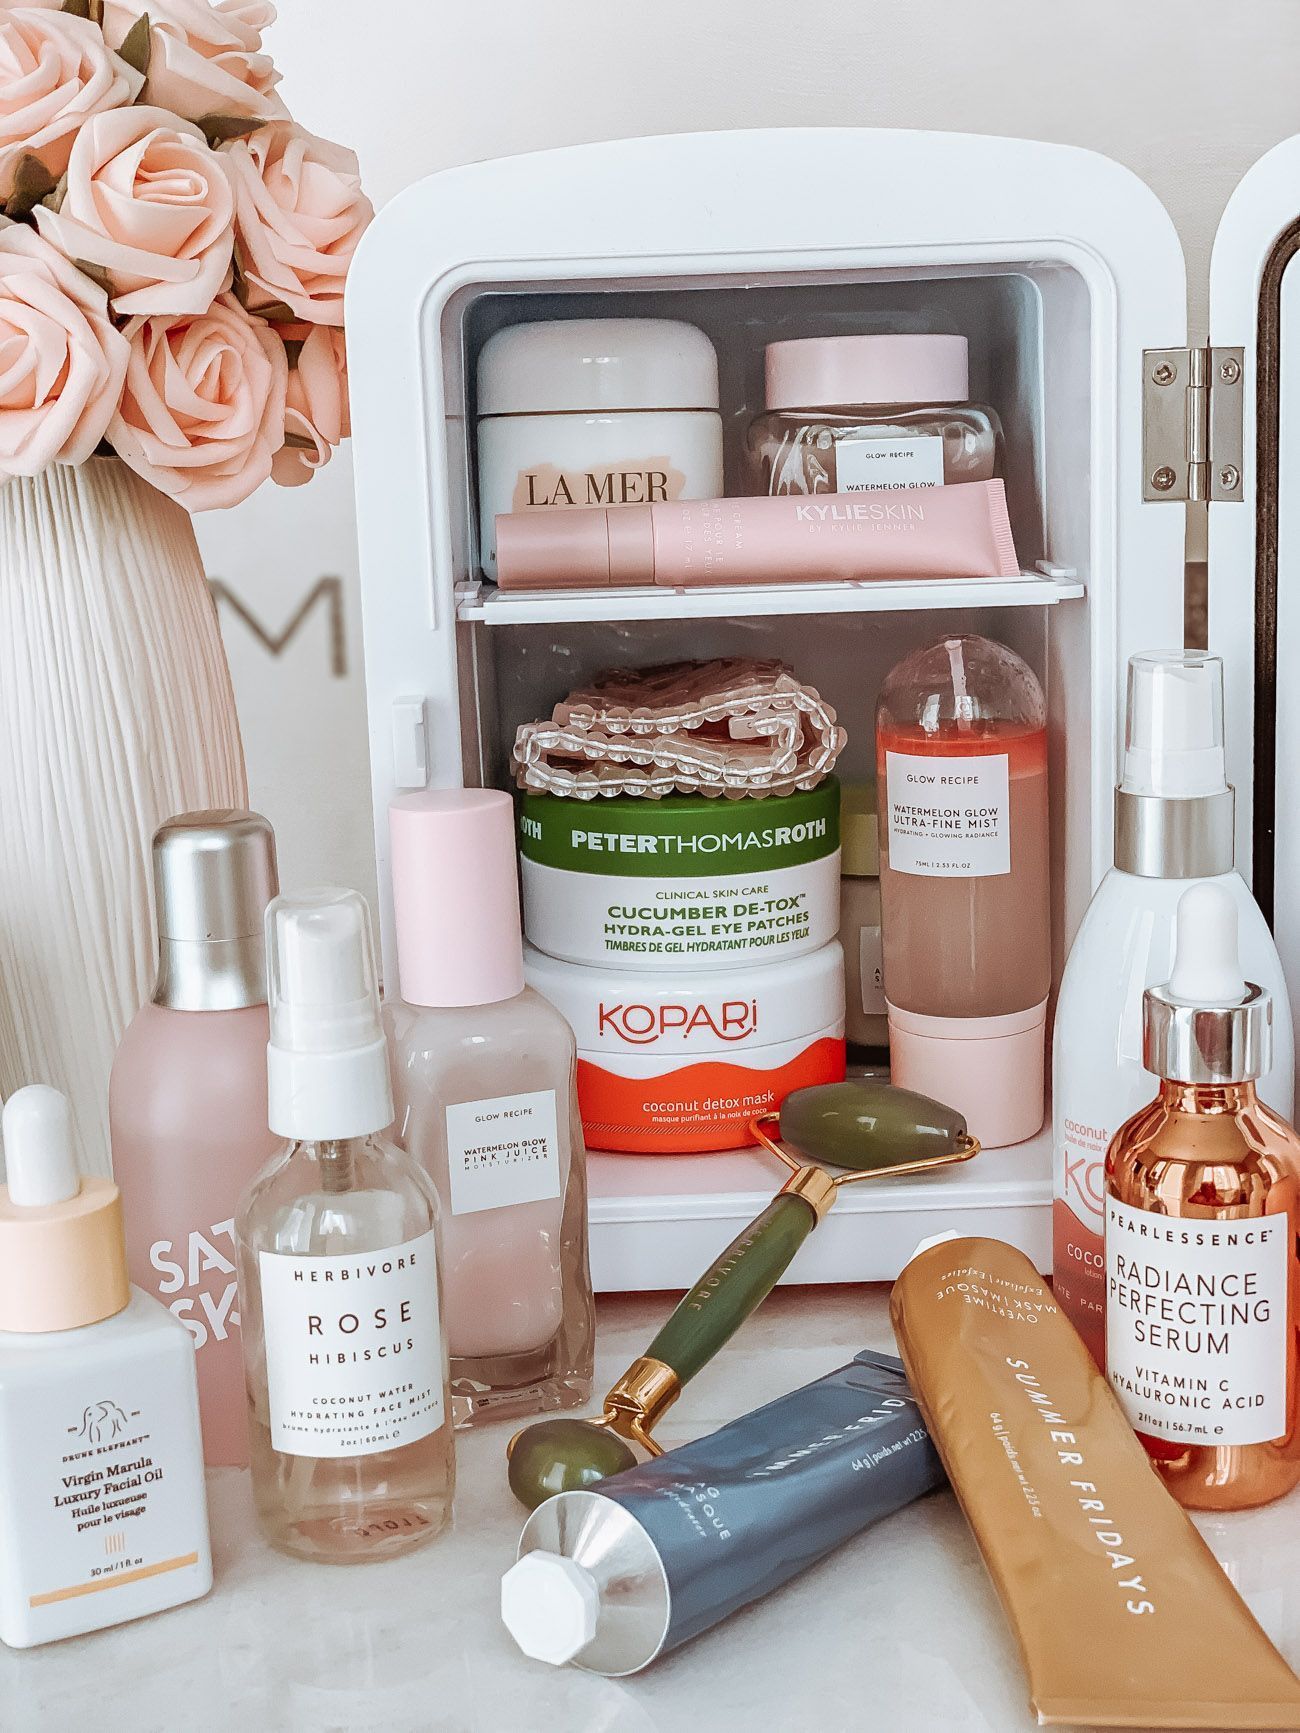 Skincare Fridge Essentials - Do You Have One Yet? - BLONDIE IN THE CITY - Skincare Fridge Essentials - Do You Have One Yet? - BLONDIE IN THE CITY -   18 beauty Aesthetic products ideas